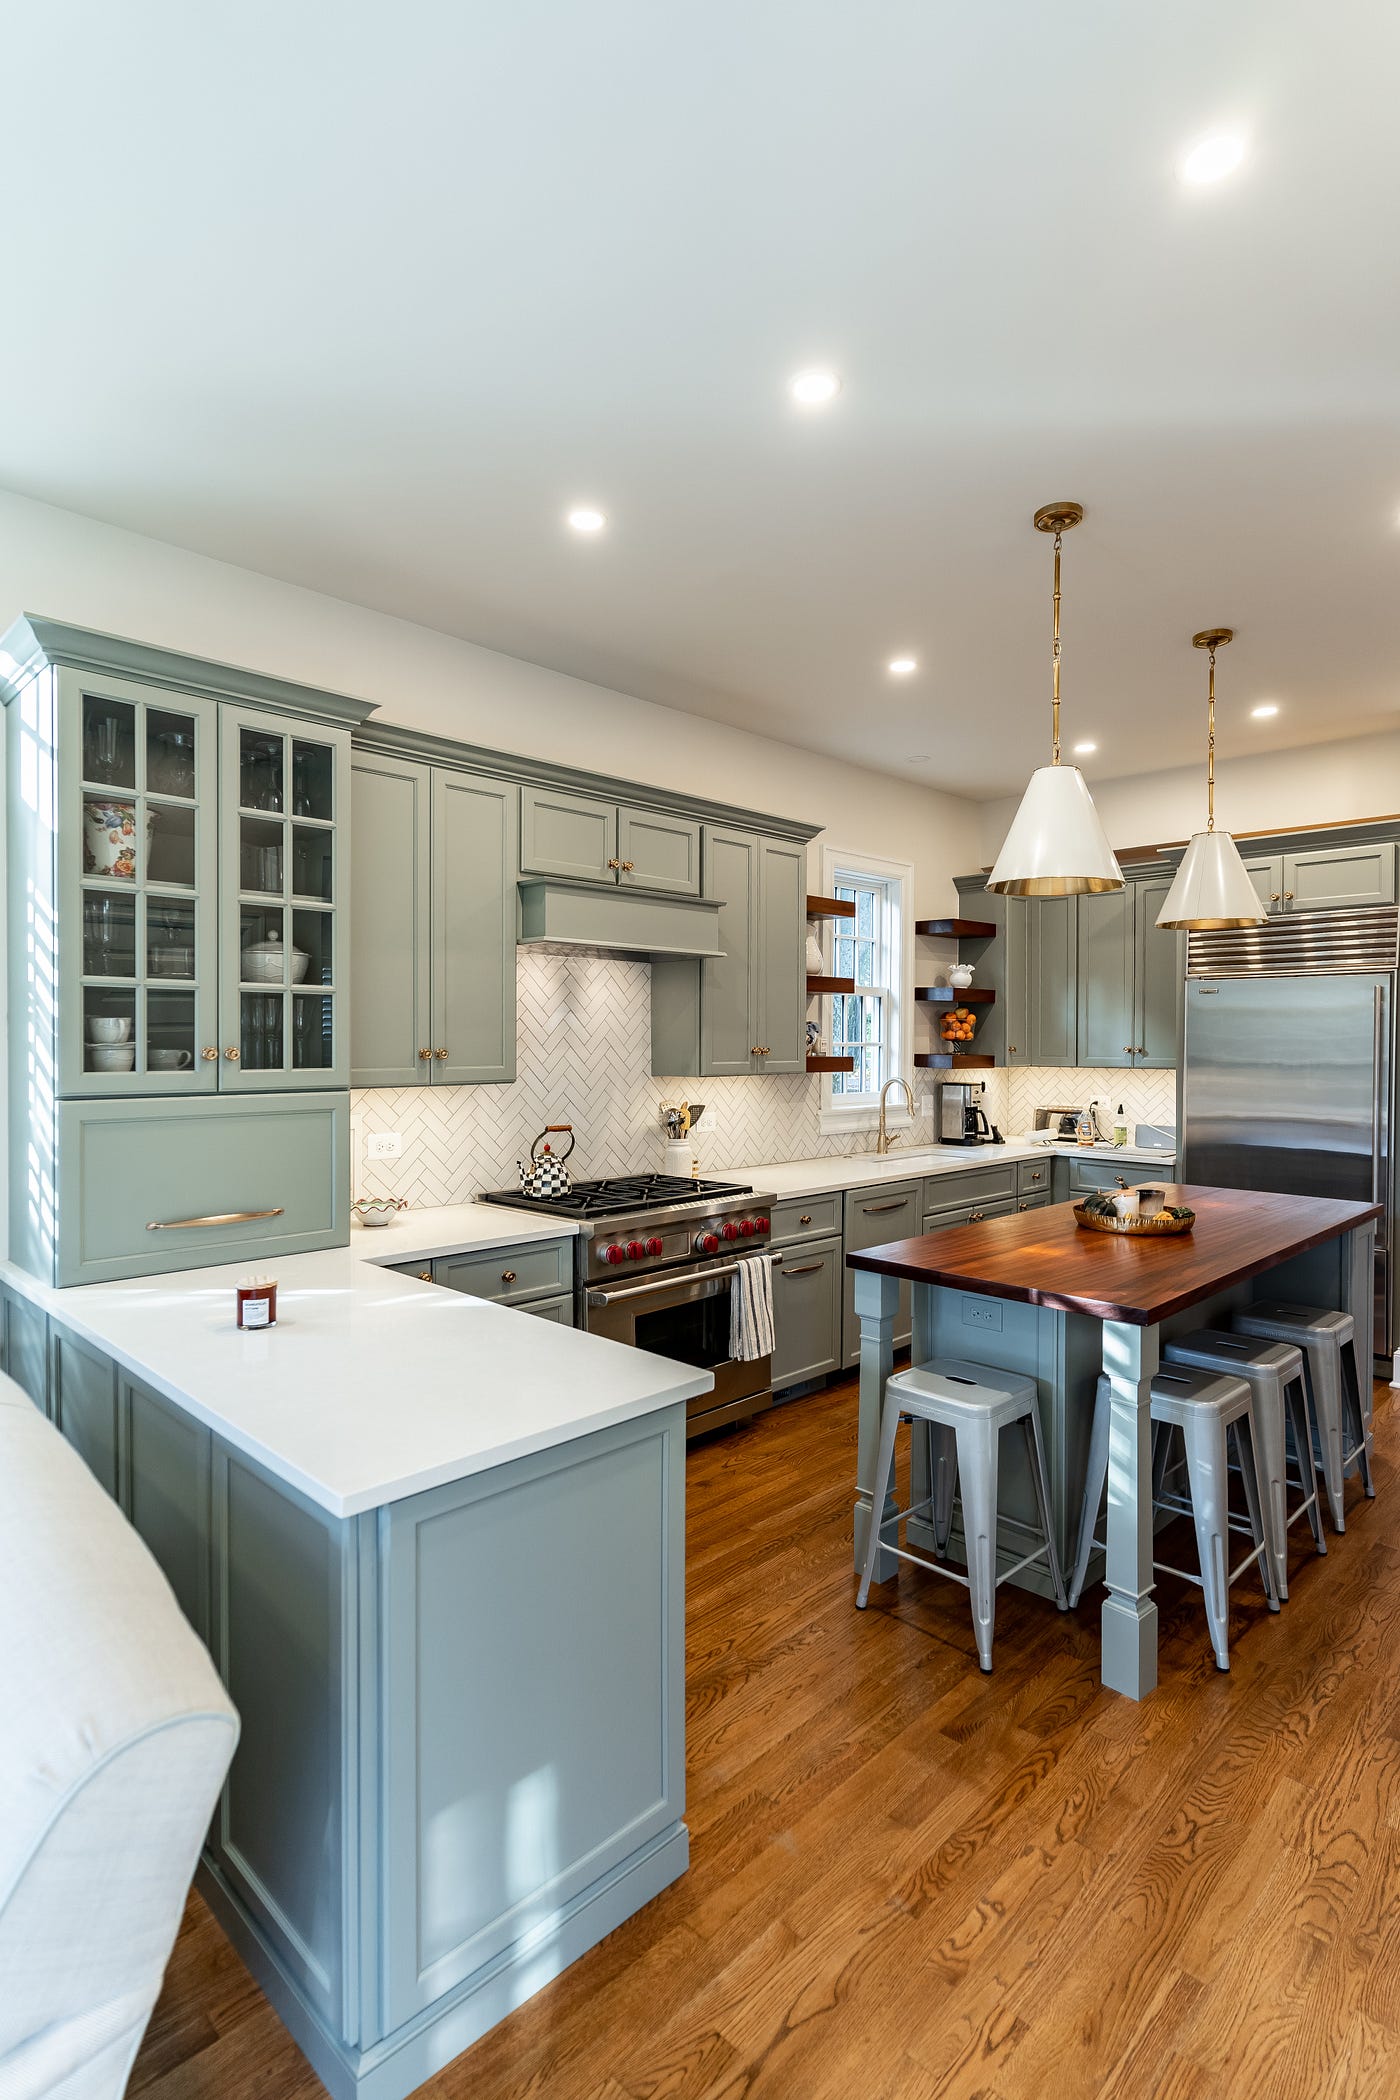 Kitchen with pale green cabinetry, marble white counter tops, and a center island with seating